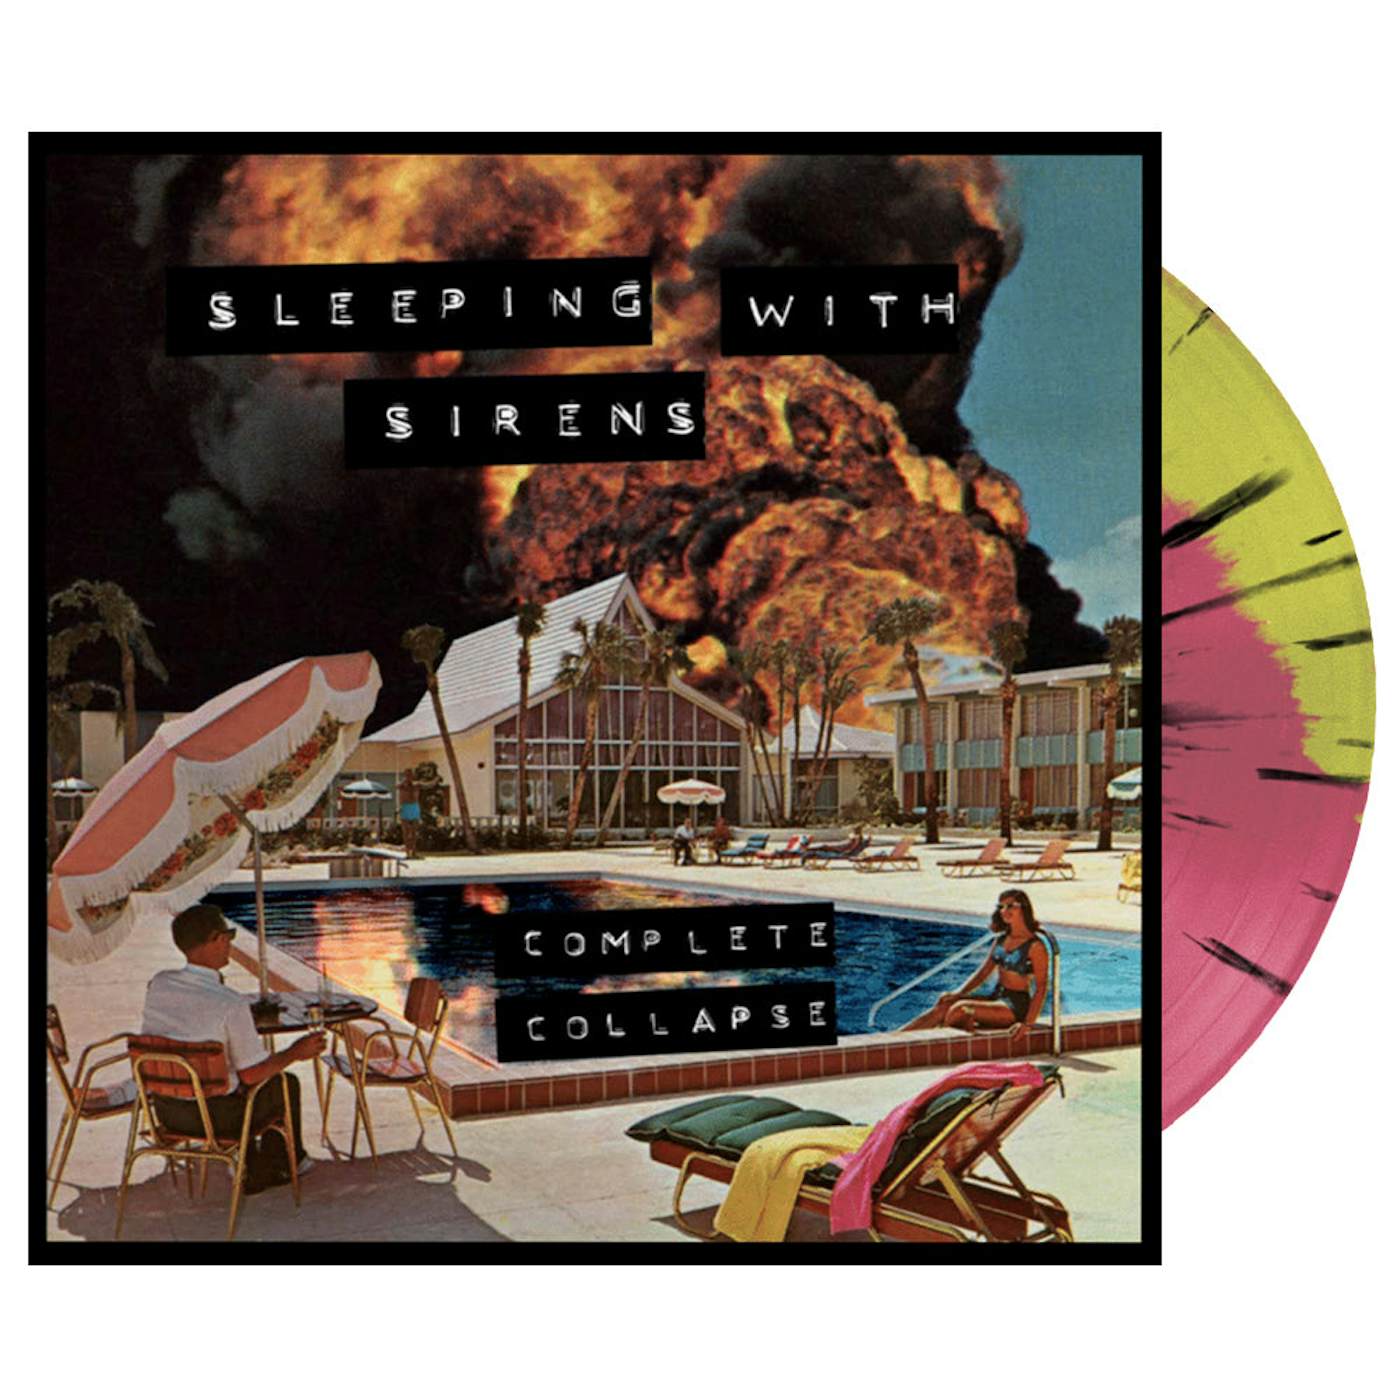 Sleeping With Sirens - 'Complete Collapse' Yellow + Hot Pink Side A/B w/ Black Splatter Vinyl